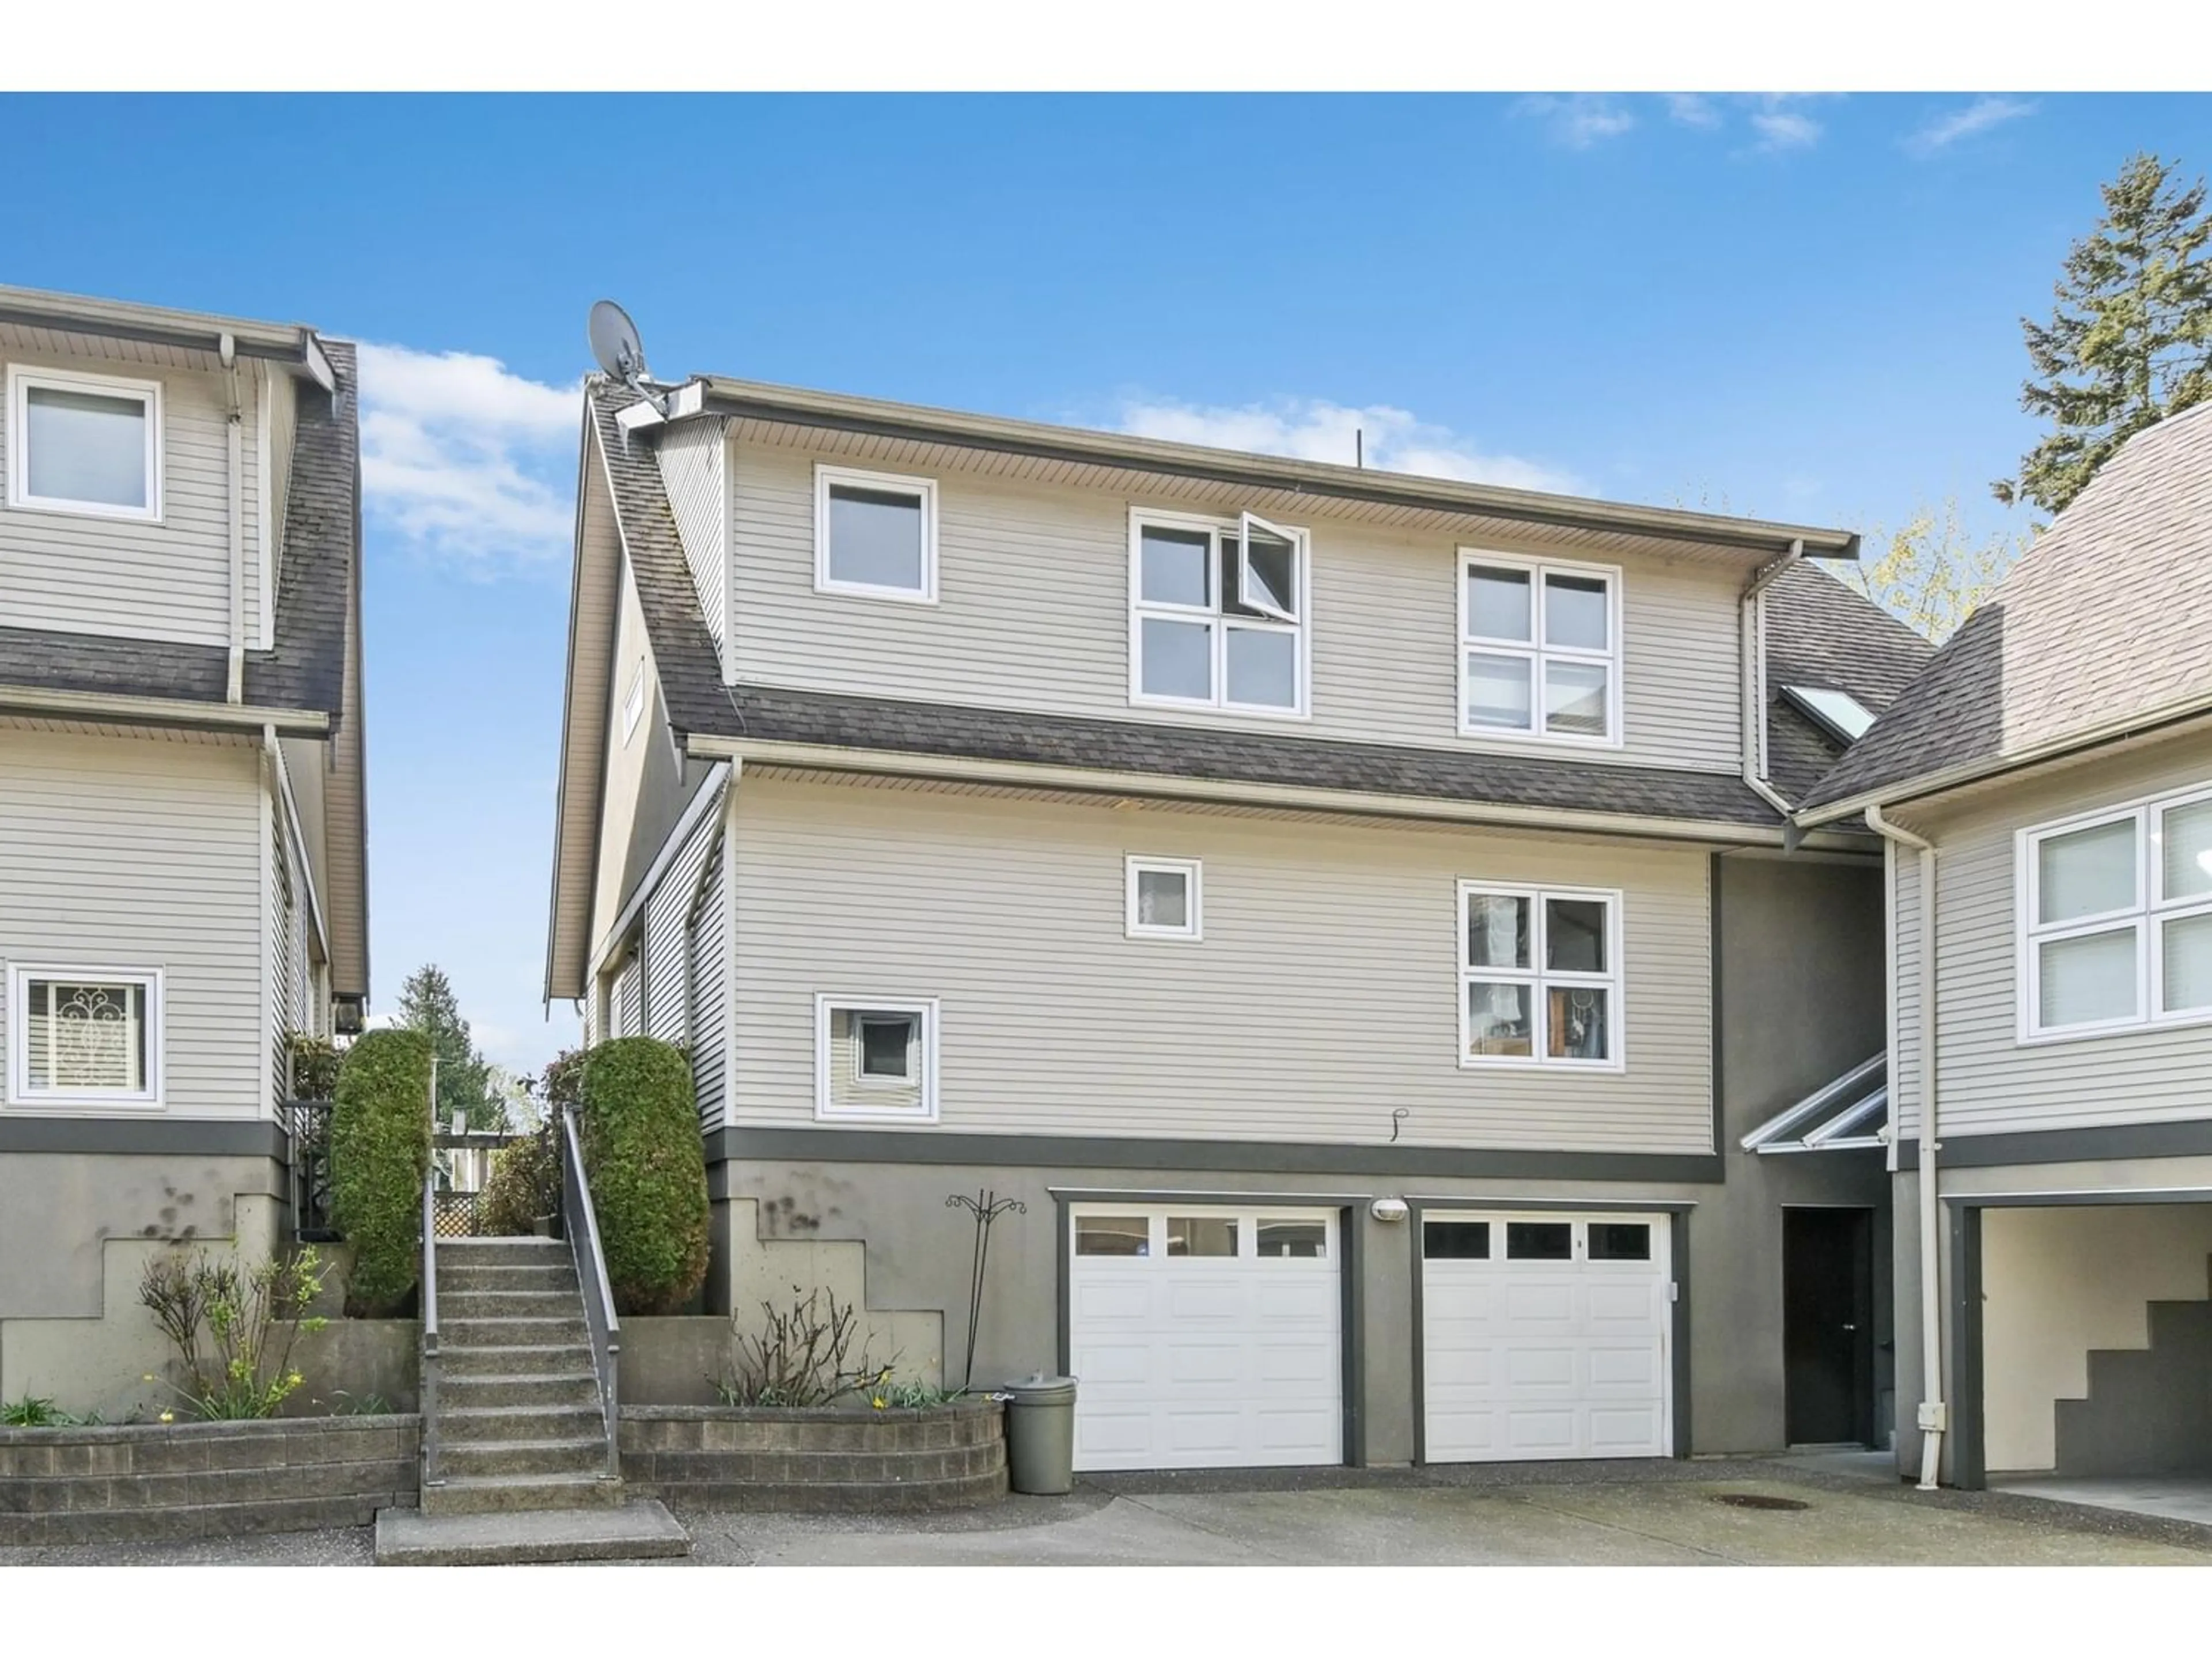 A pic from exterior of the house or condo for 4 11530 84 AVENUE, Delta British Columbia V4C2M1